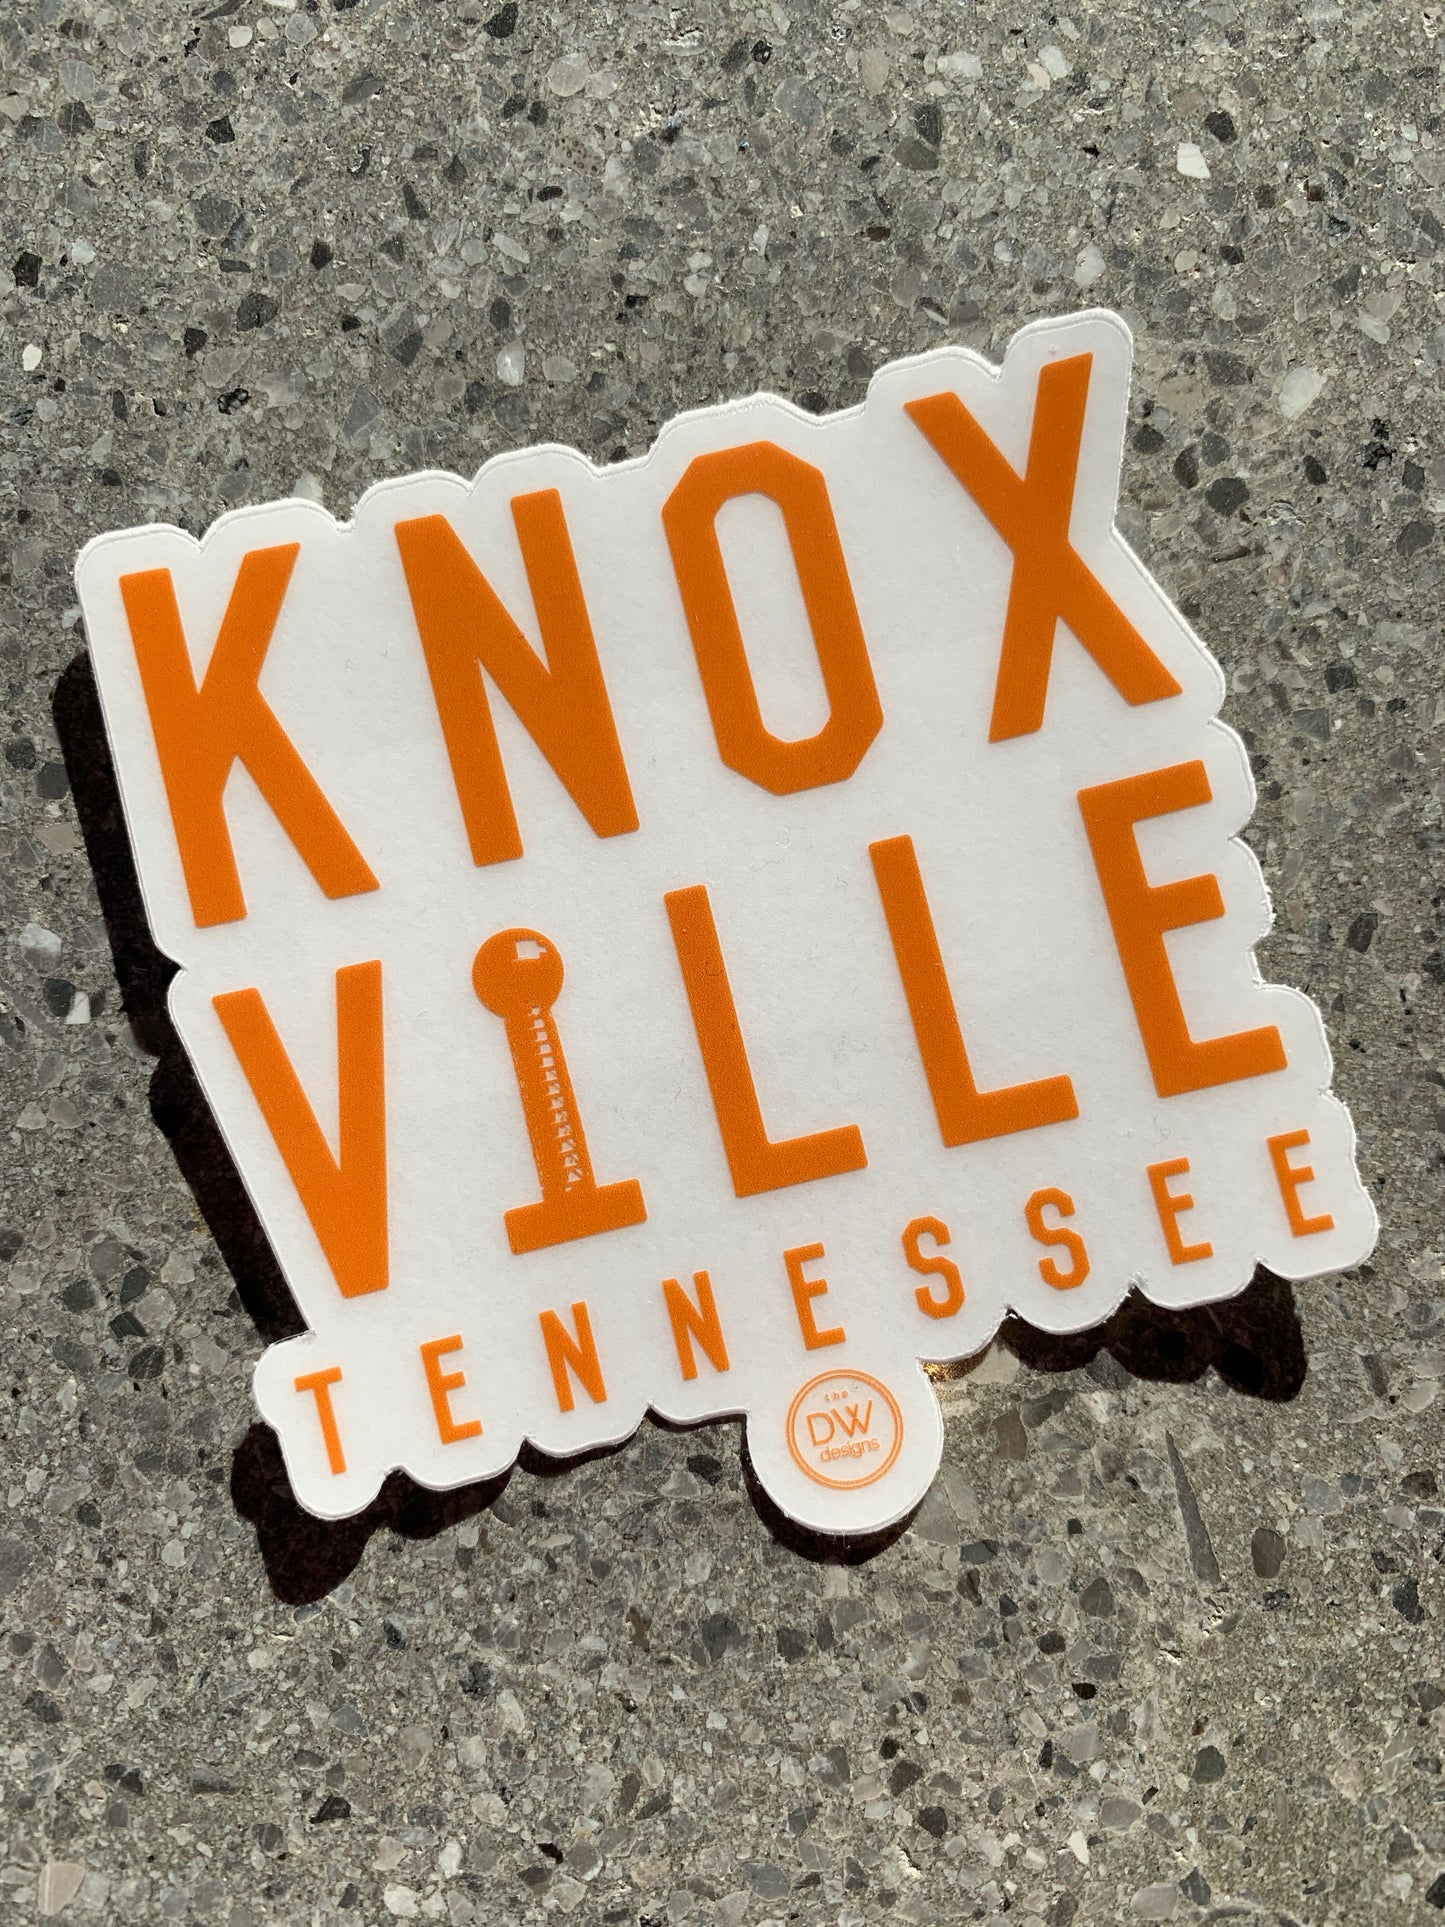 The Knoxville Stacked Sticker